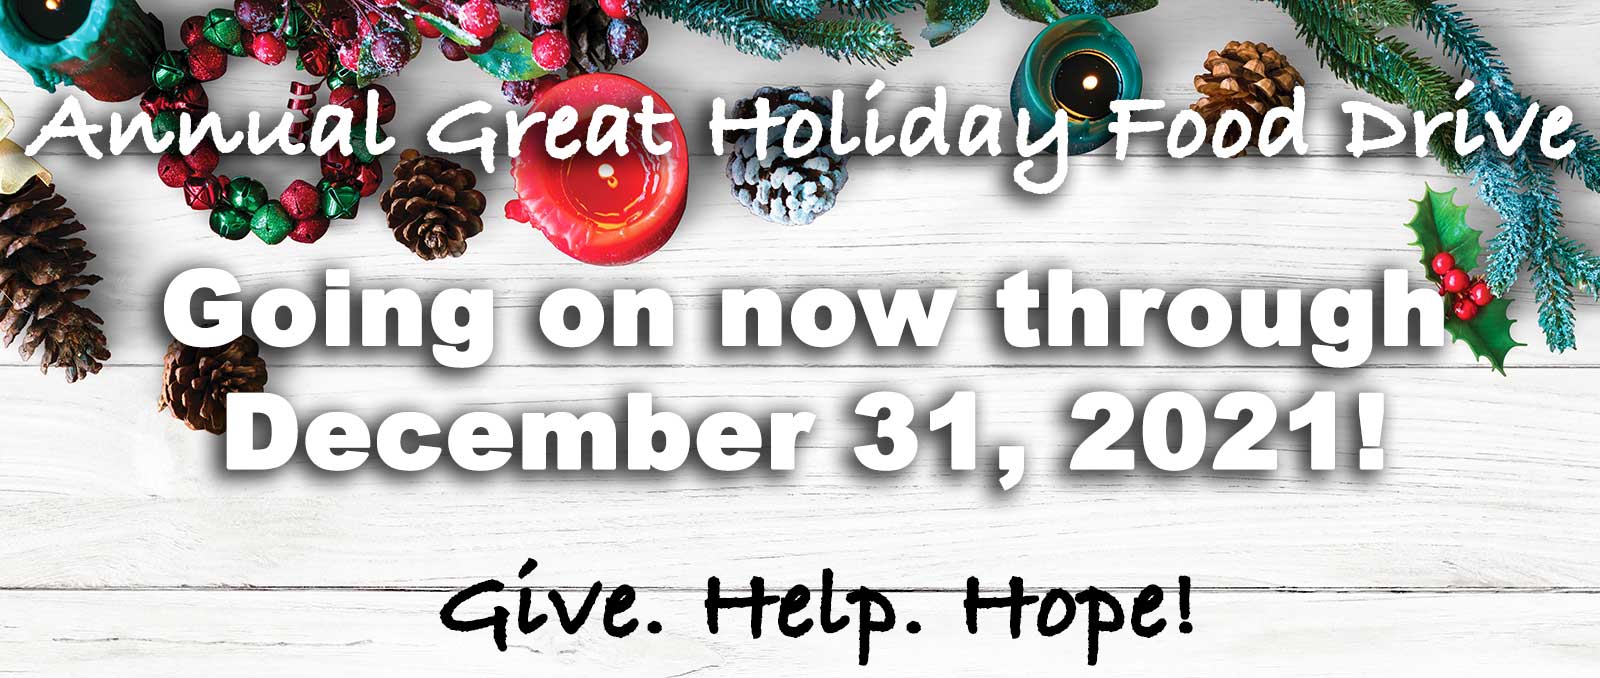 great holiday food drive give help hople!